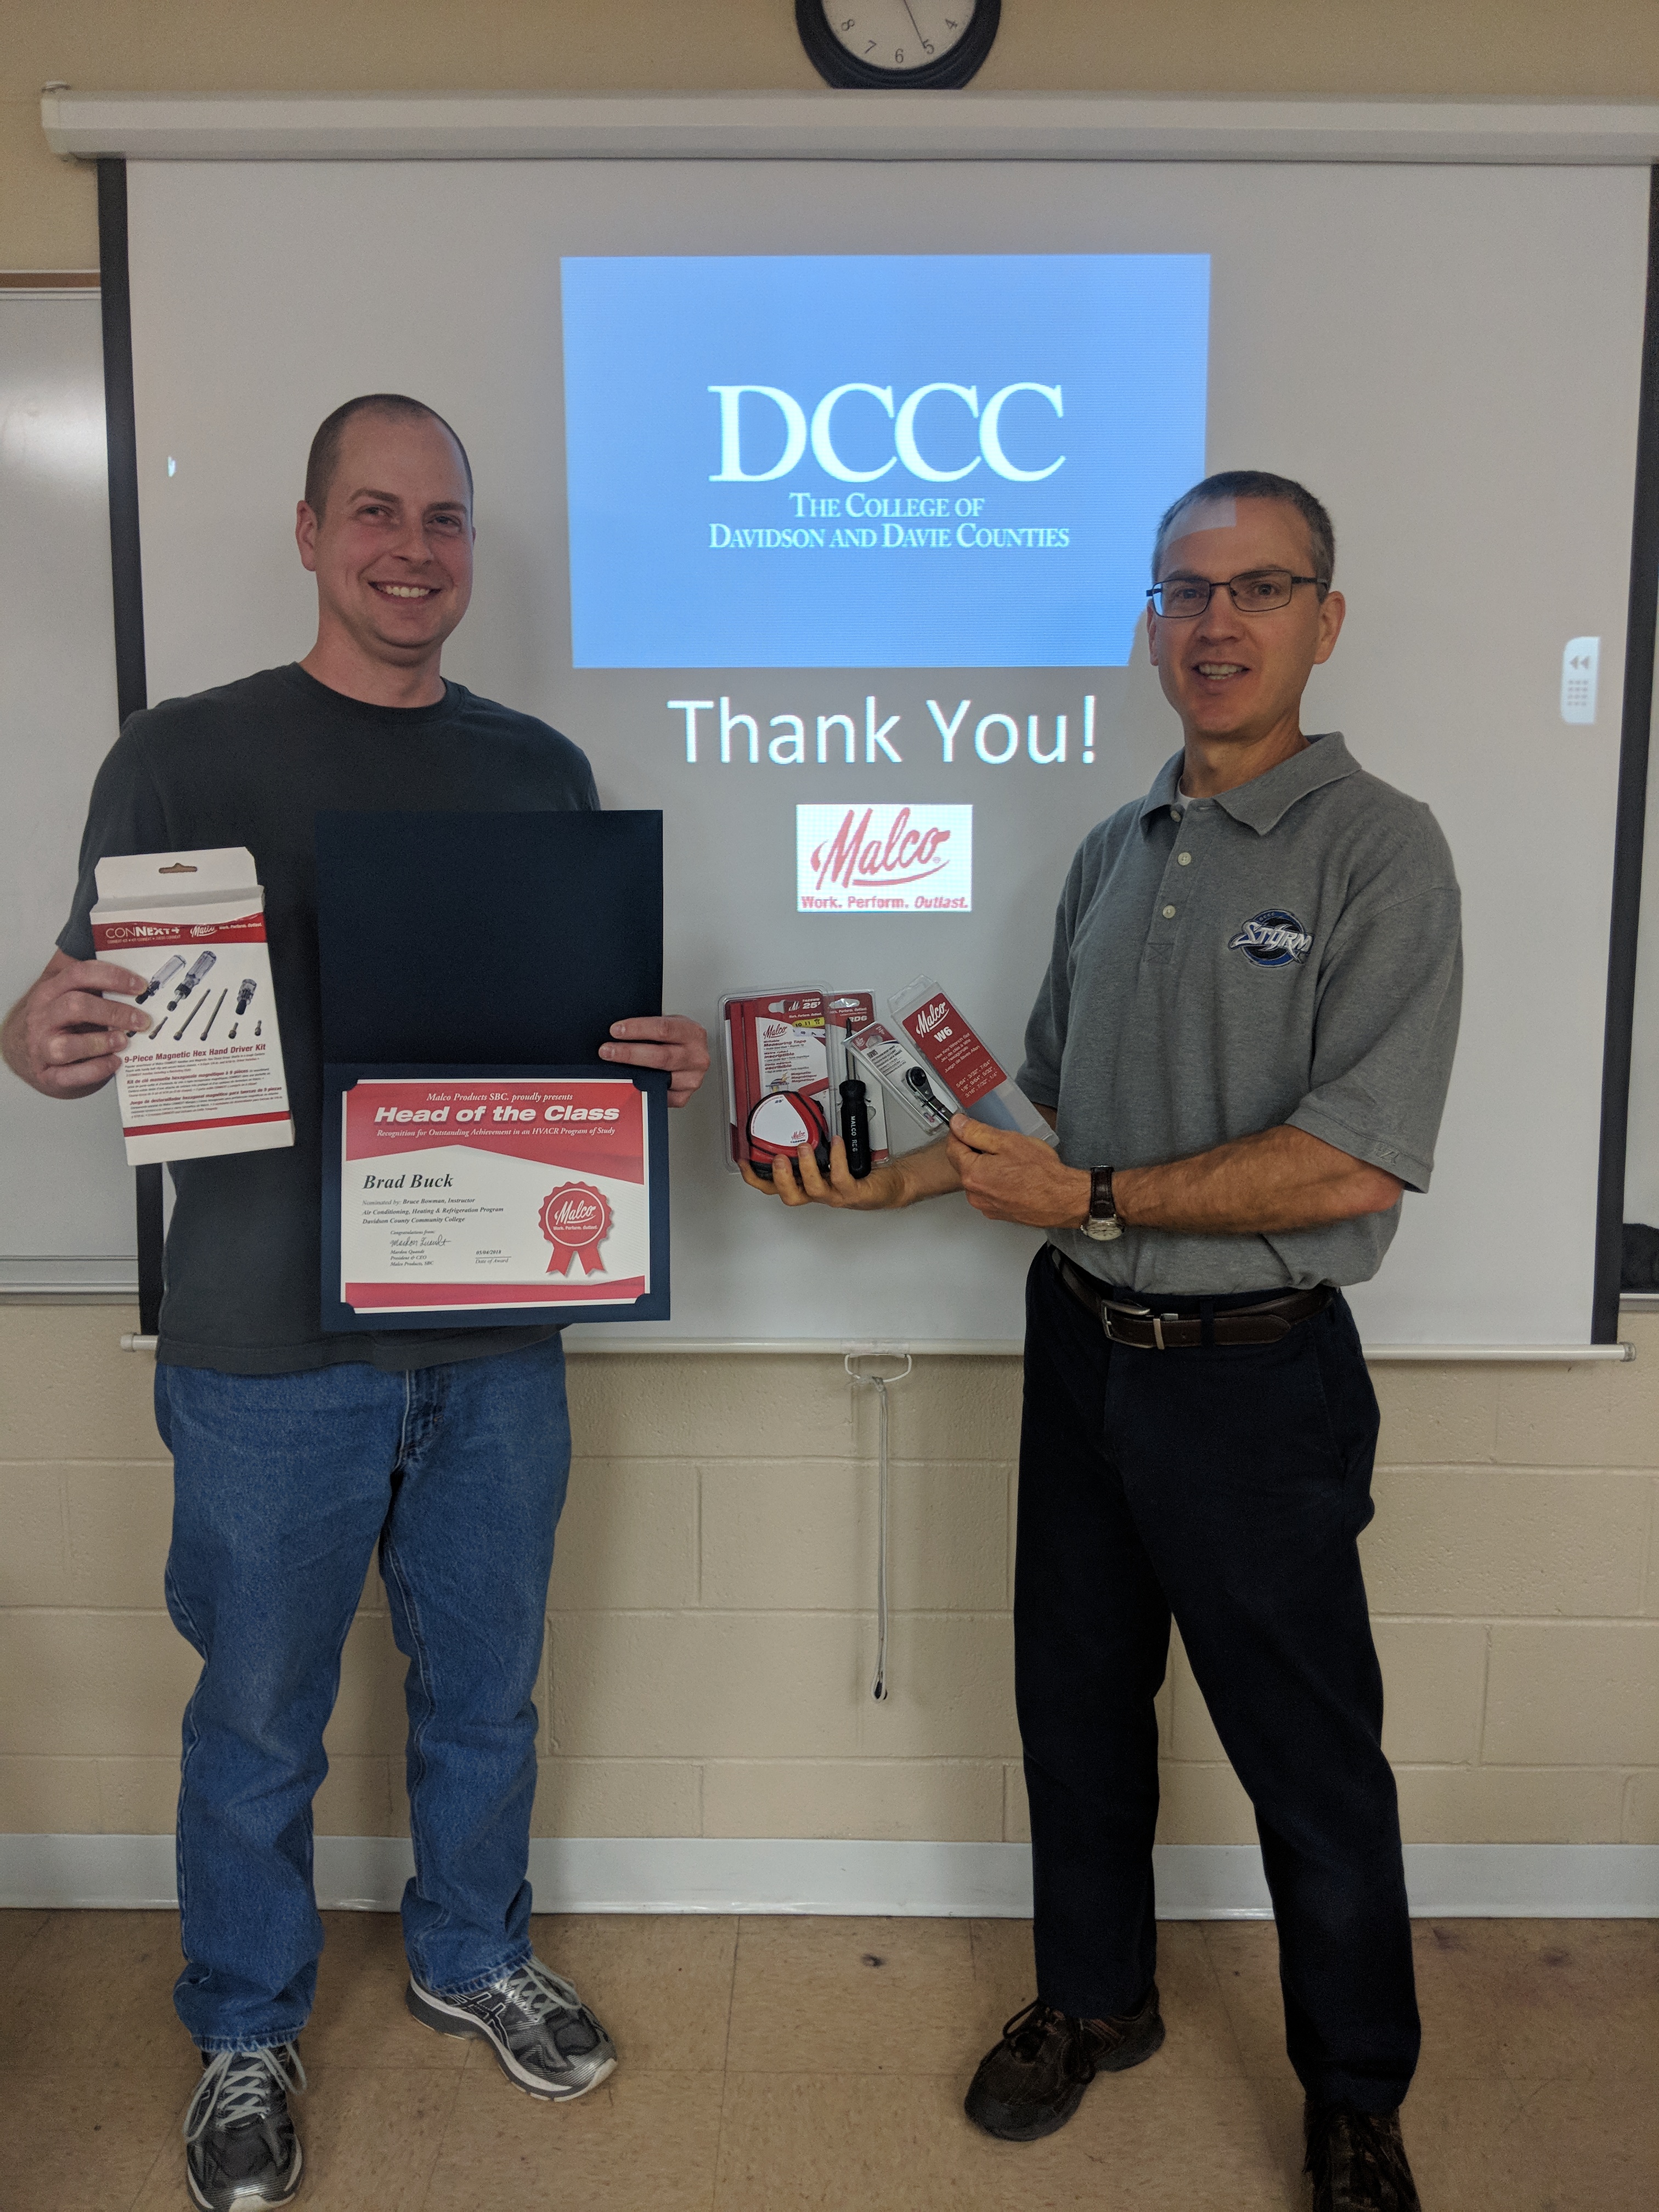 Teacher and student holding Malco tools and a certificate of head of class